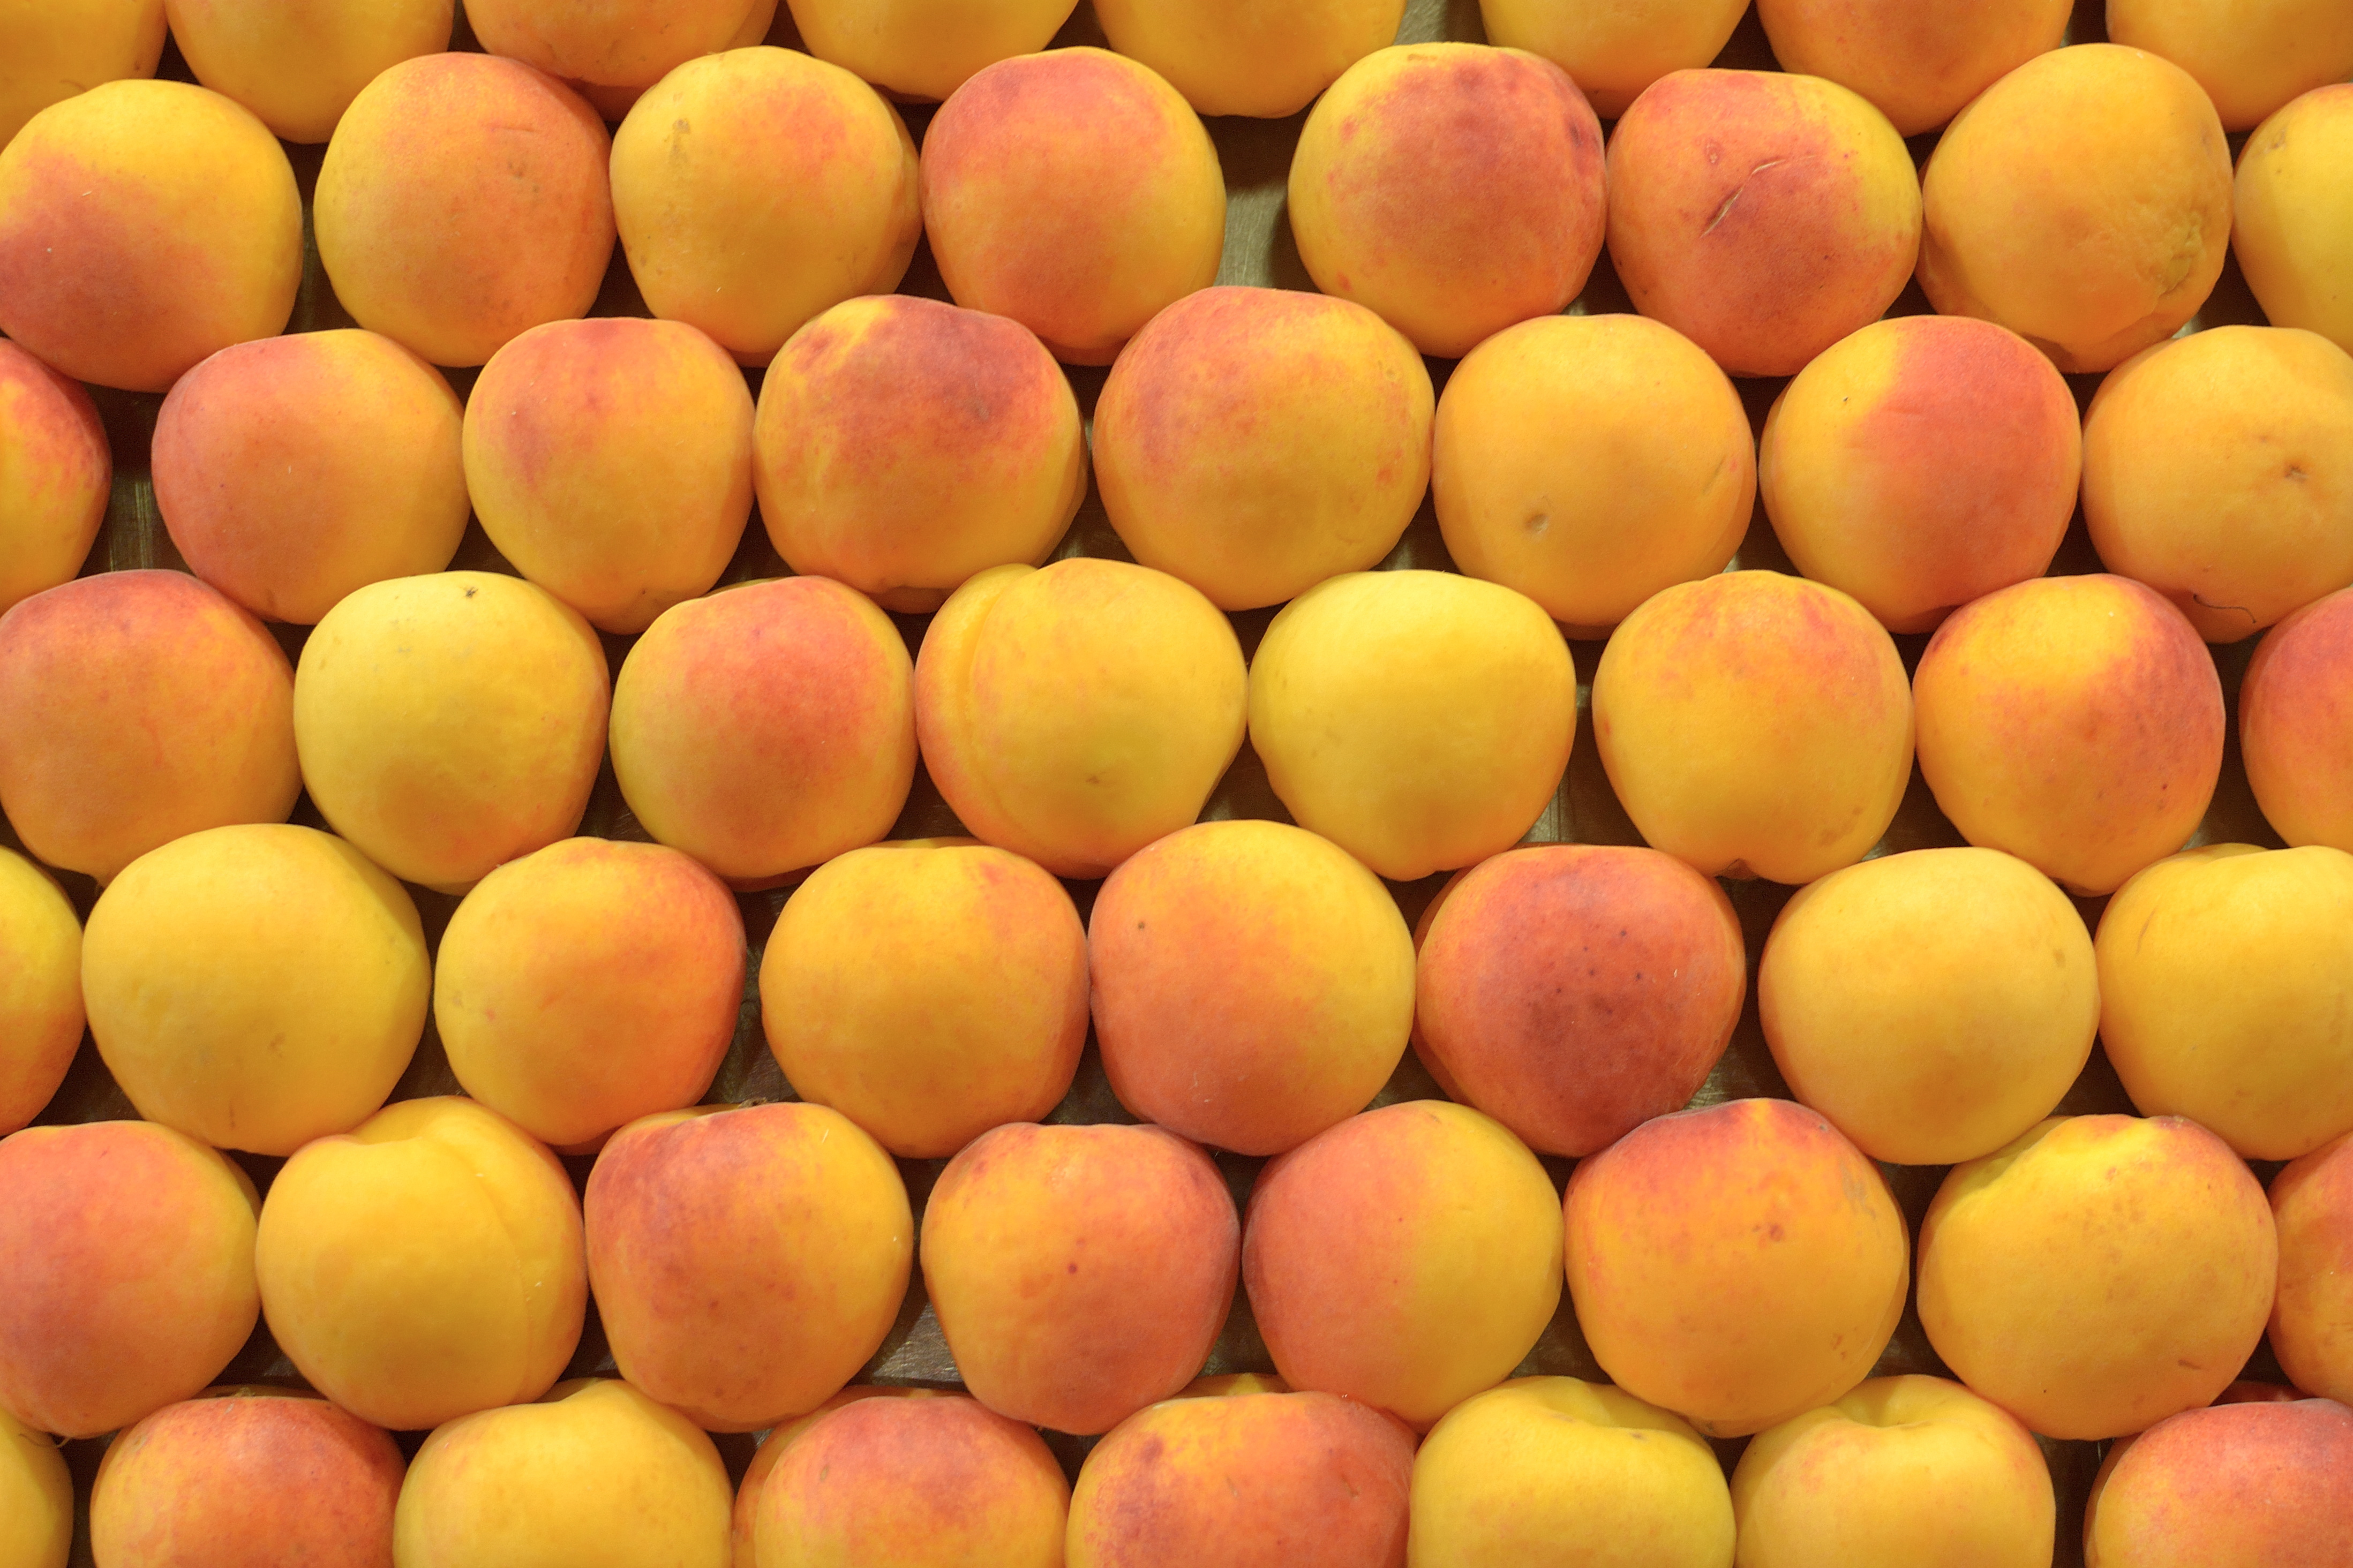 Timing may differ slightly depending on where you live, but make peaches a priority for your grocery basket. They are tasty in both salads and summer cocktails.